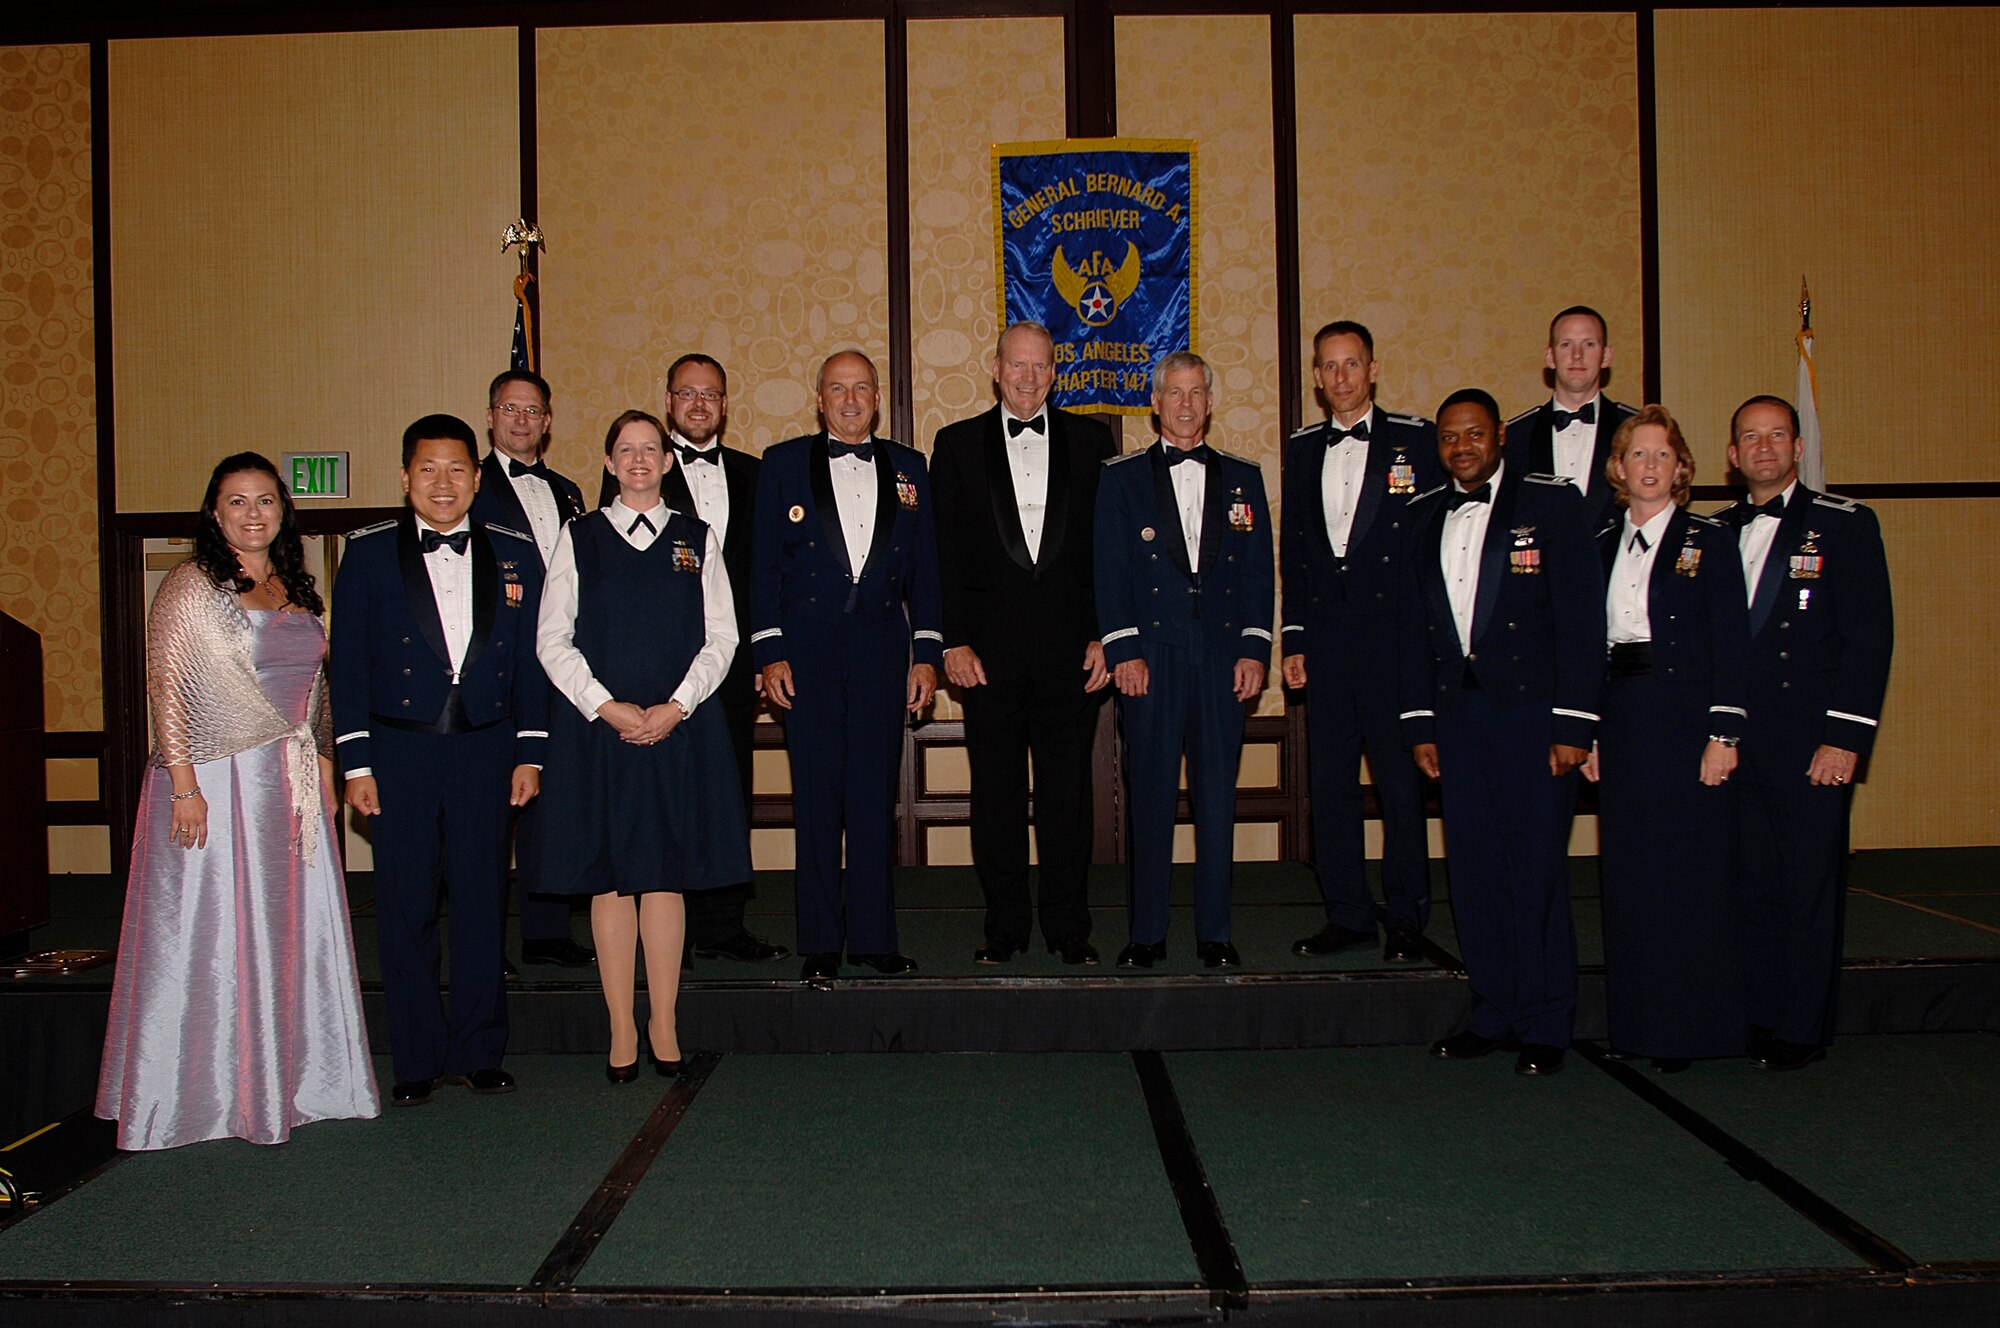 AFA's General Bernard A. Schreiver Chapter honored 147 outstanding SMC personnel at its annual Salute to SMC Banquet, June 22. Pictured from left to right are Stacy Dumas, Capt. Daniel Lim, Col. Randall Weidenheimer, Maj. Jennifer van Weezendonk, Brice Barrett, Lt. Gen. Michael Hamel, Retired Lt. Gen. Brian Arnold, Maj. Gen. William Shelton, Lt. Col. William Berkstresser, Capt. Donny White, 1st Lt. Alex White,  Lt. Col. Donna Shipton and Col. Wesley Ballenger. Other winners not pictured include: Capt. Donita Ruehs, TSgt. Travis Chenard, SrA Ashley Borja and Barbara Konieczny